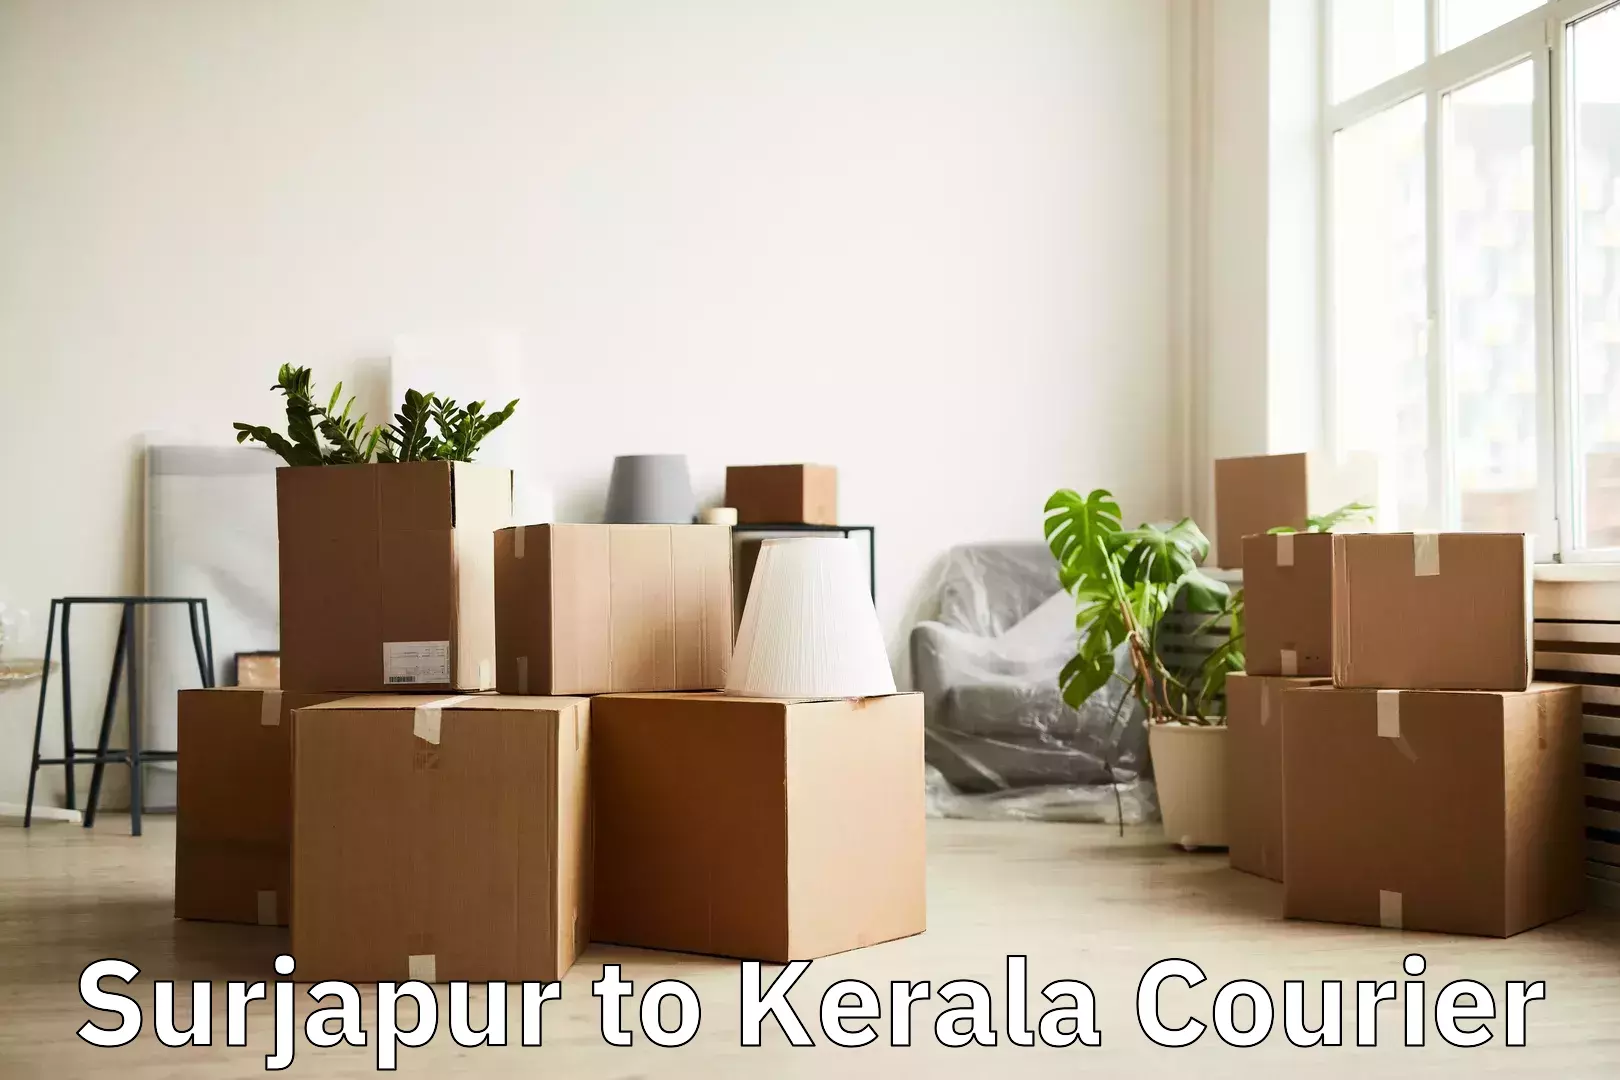 Quick baggage pickup in Surjapur to Cochin